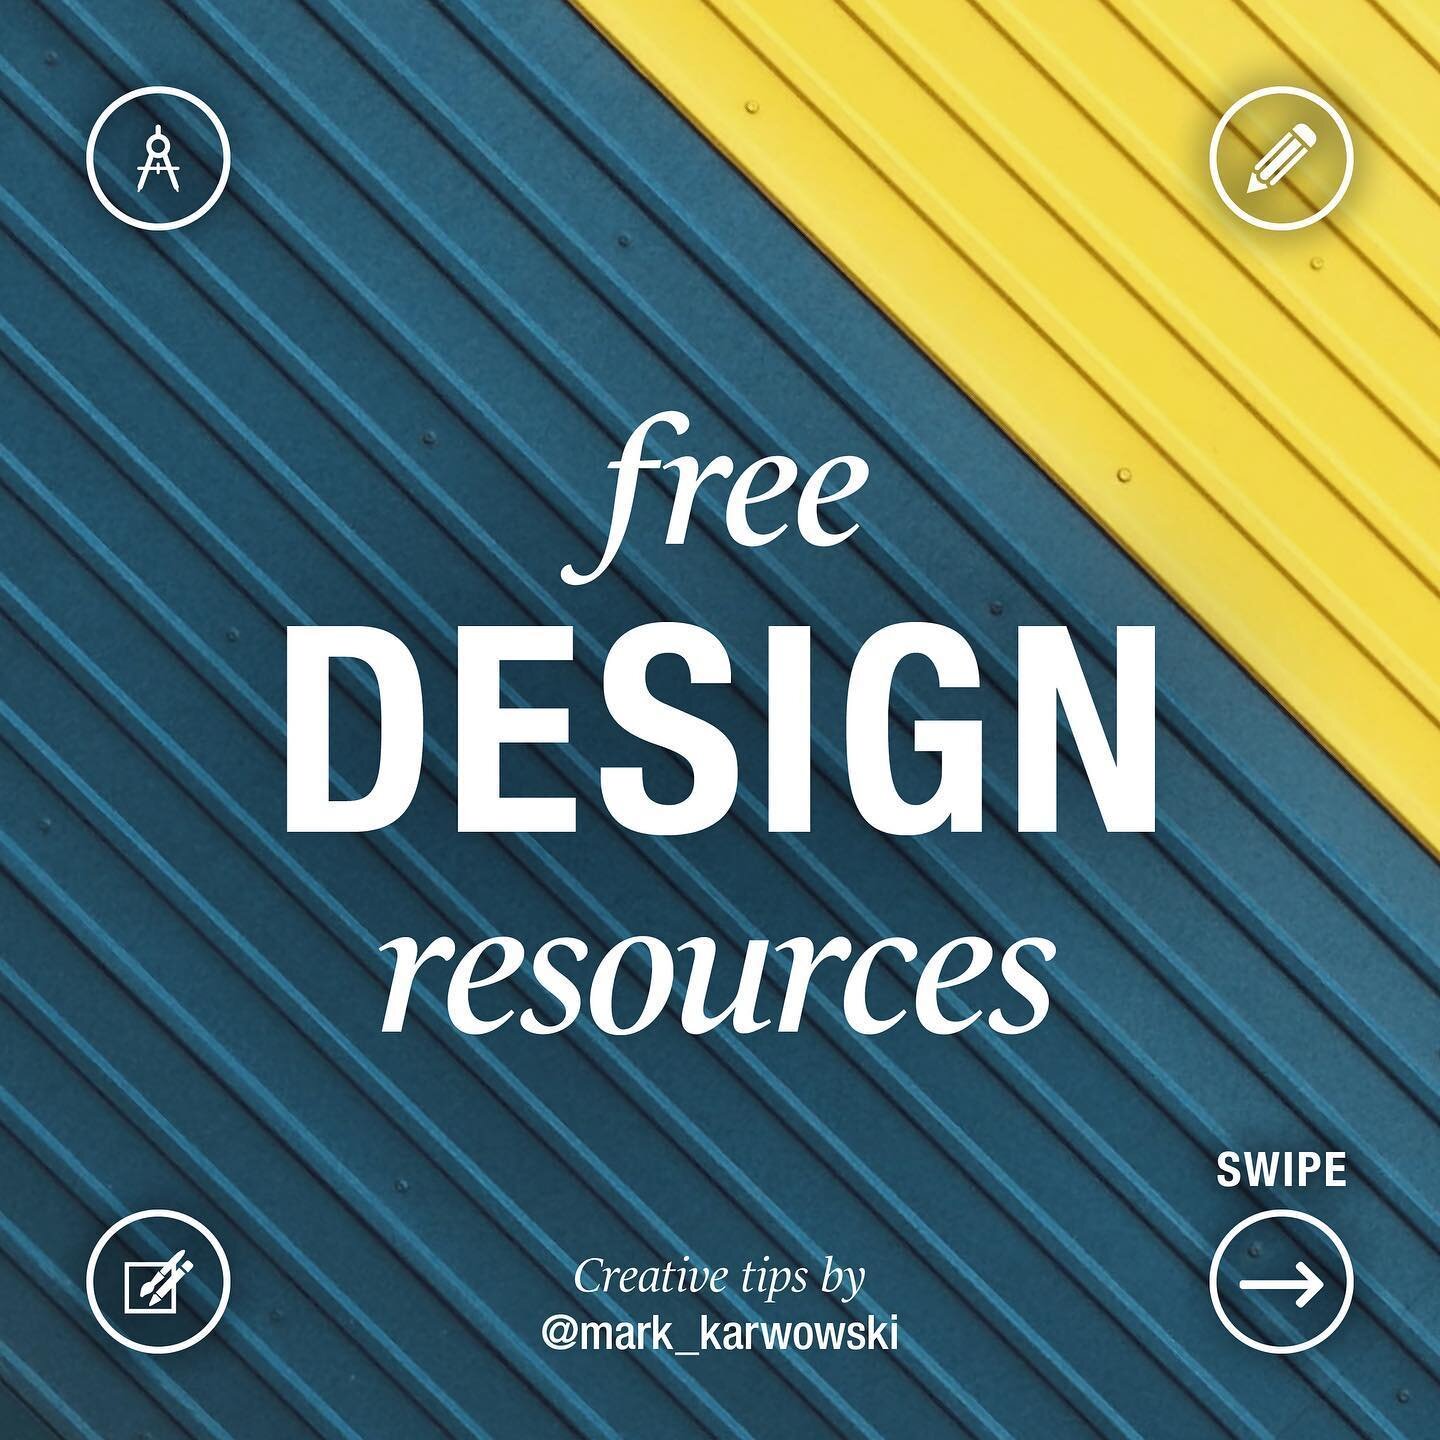 𝗙𝗼𝗹𝗹𝗼𝘄 @𝗺𝗮𝗿𝗸_𝗸𝗮𝗿𝘄𝗼𝘄𝘀𝗸𝗶 for more designs, tips, illustrations &amp; photography. Save this post, it reveals free design and creative resources that every designer should have in their back pocket.

Reference: @unsplash @the_dots_uk 